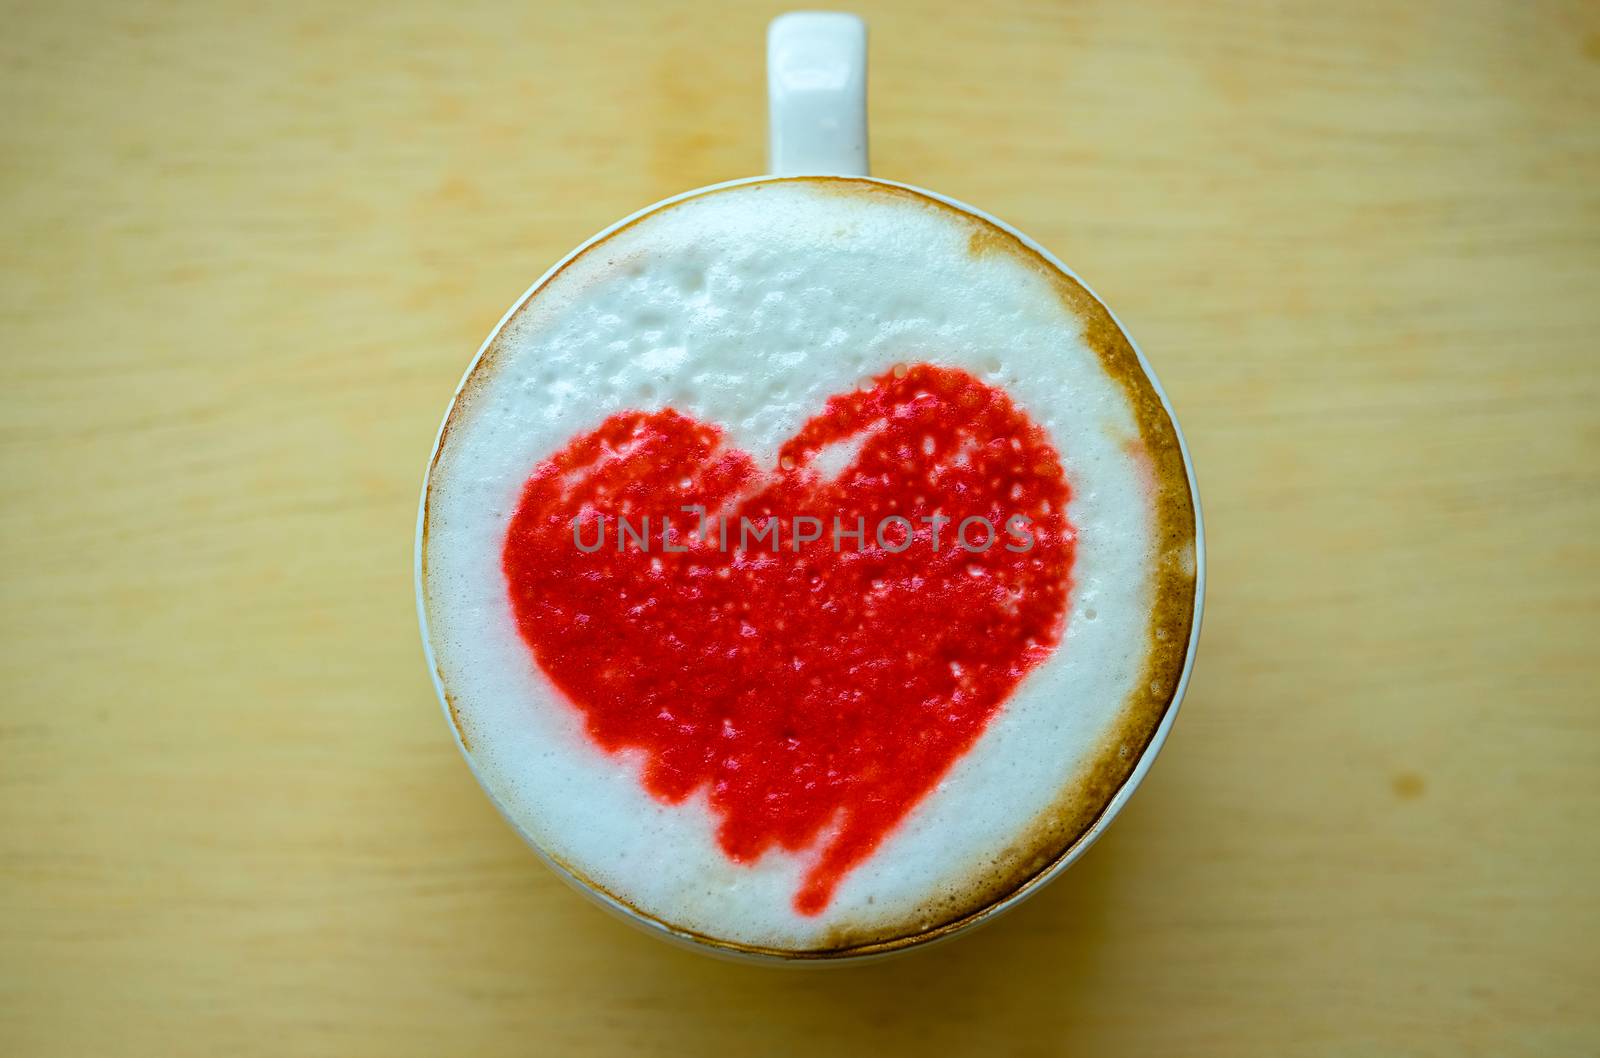 hot coffee in a white ceramic cup with red latte art, wooden background